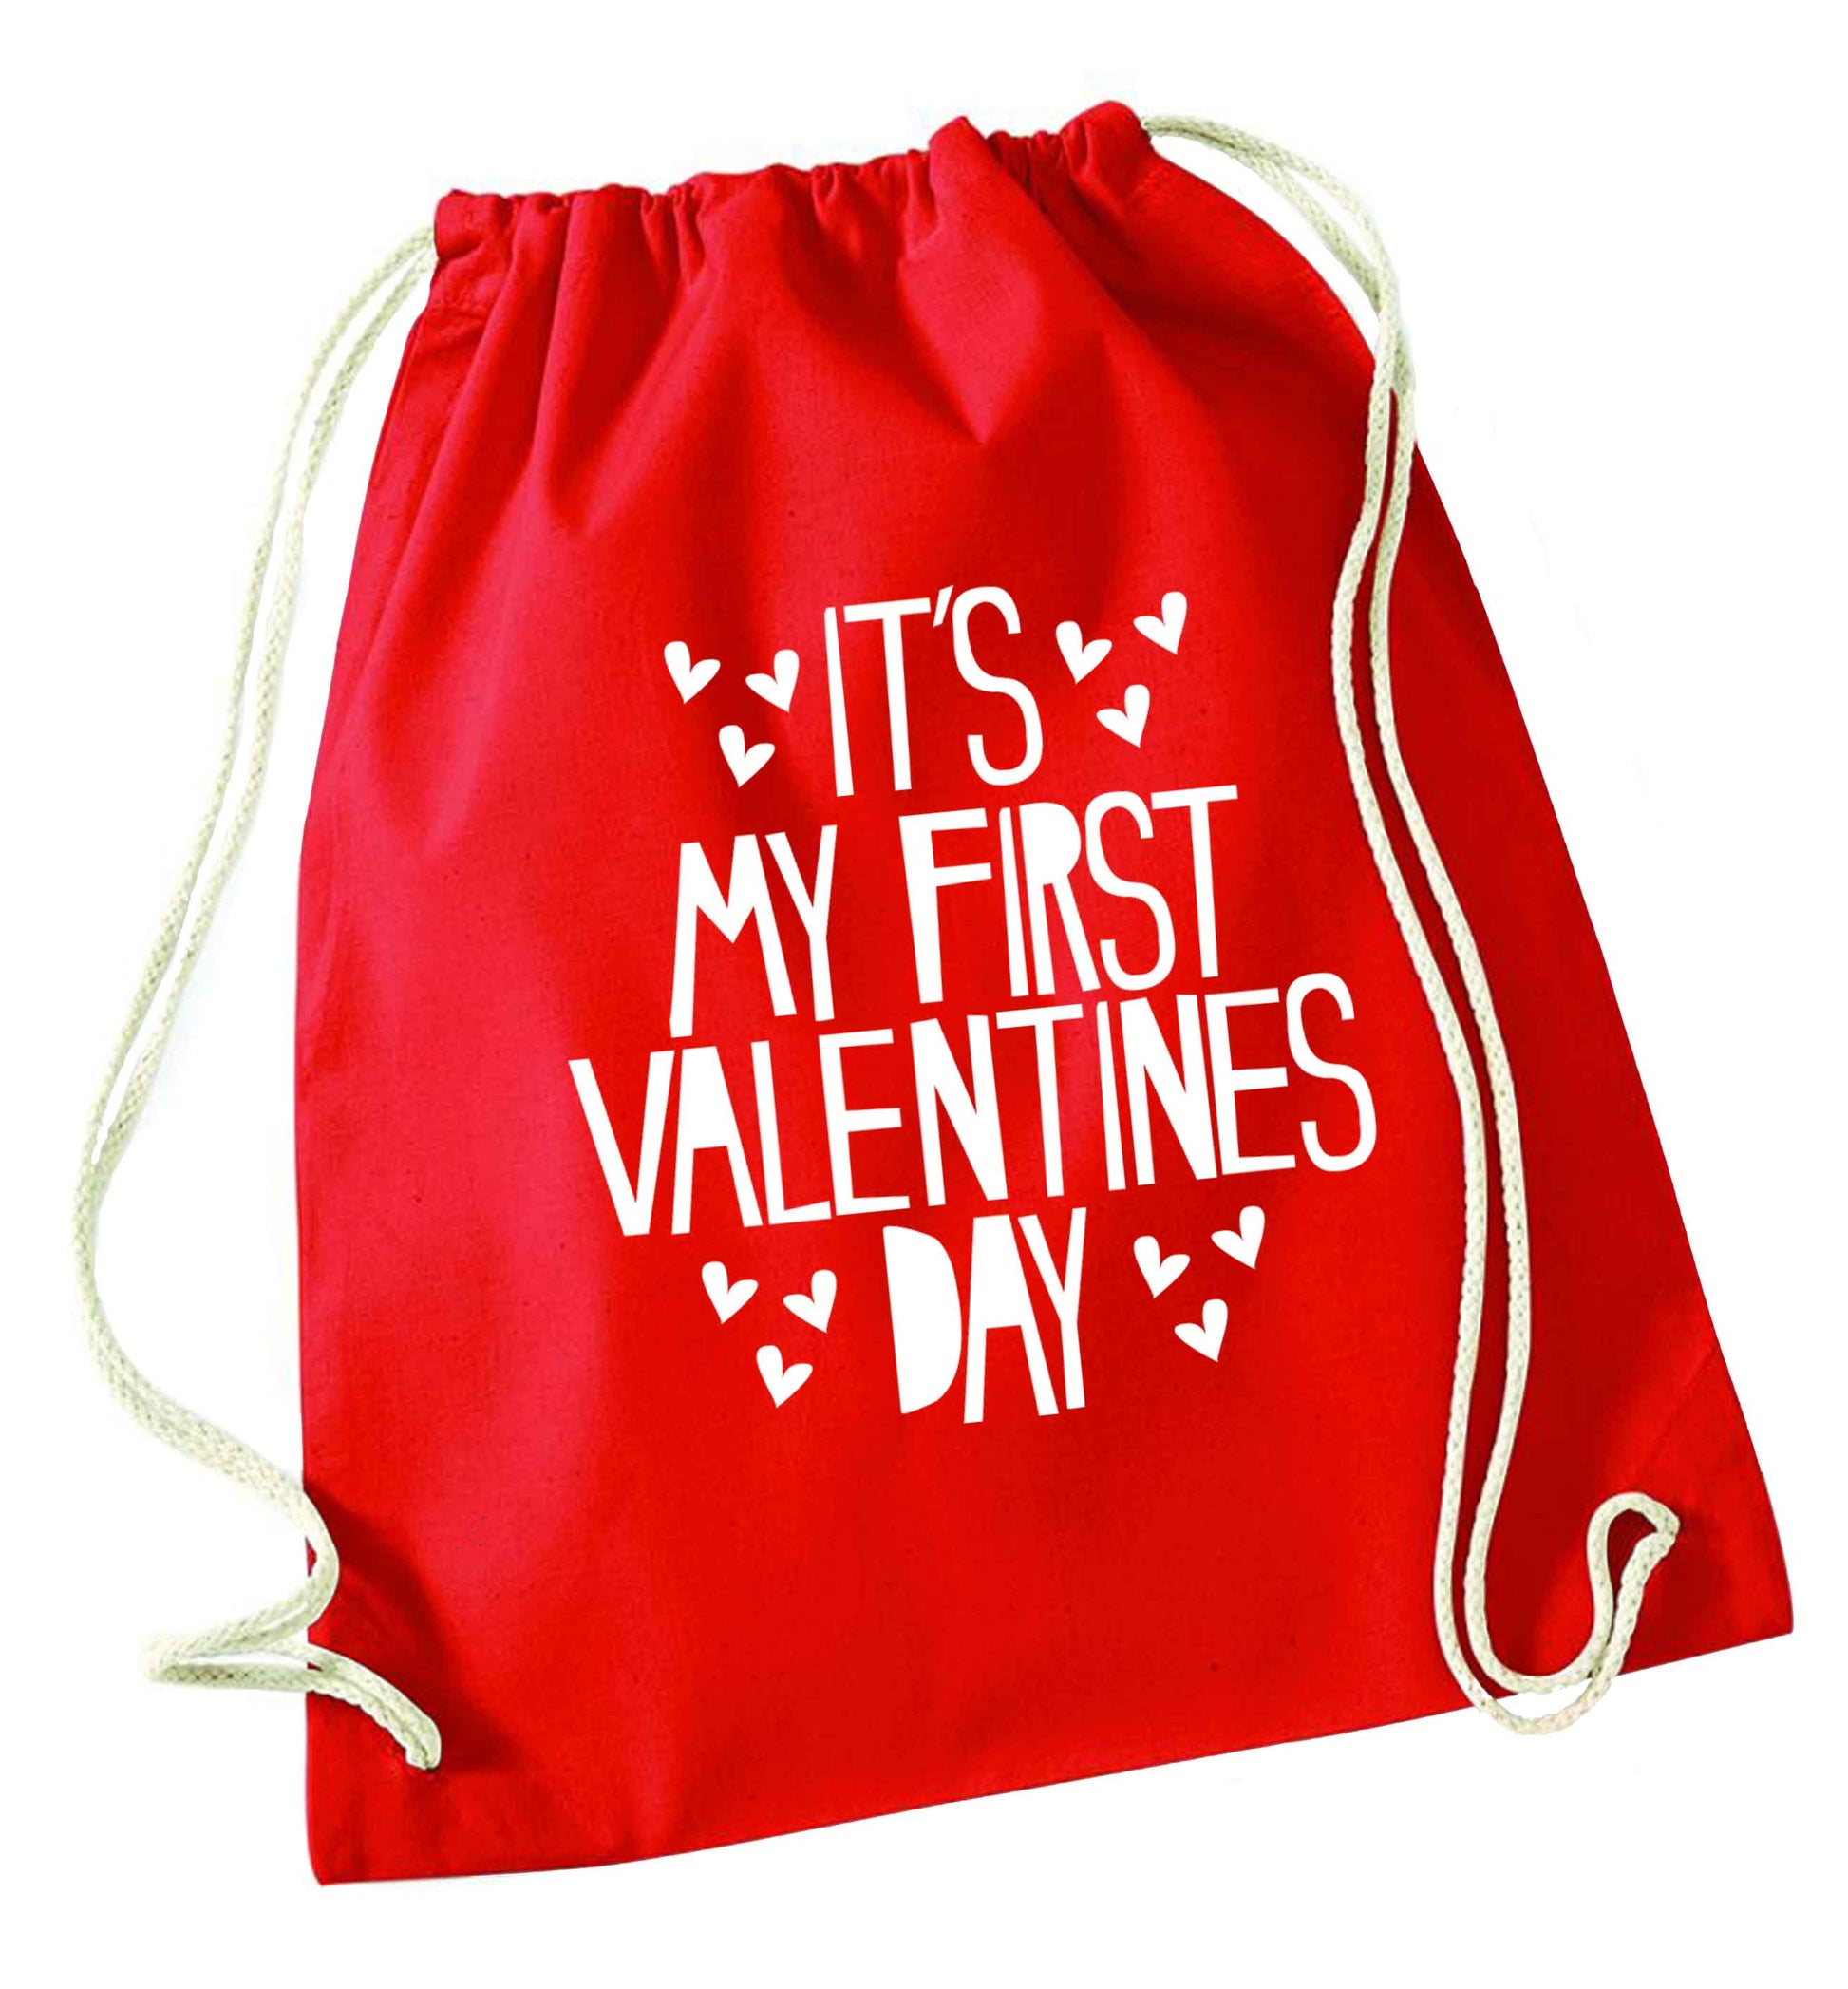 Hearts It's my First Valentine's Day red drawstring bag 